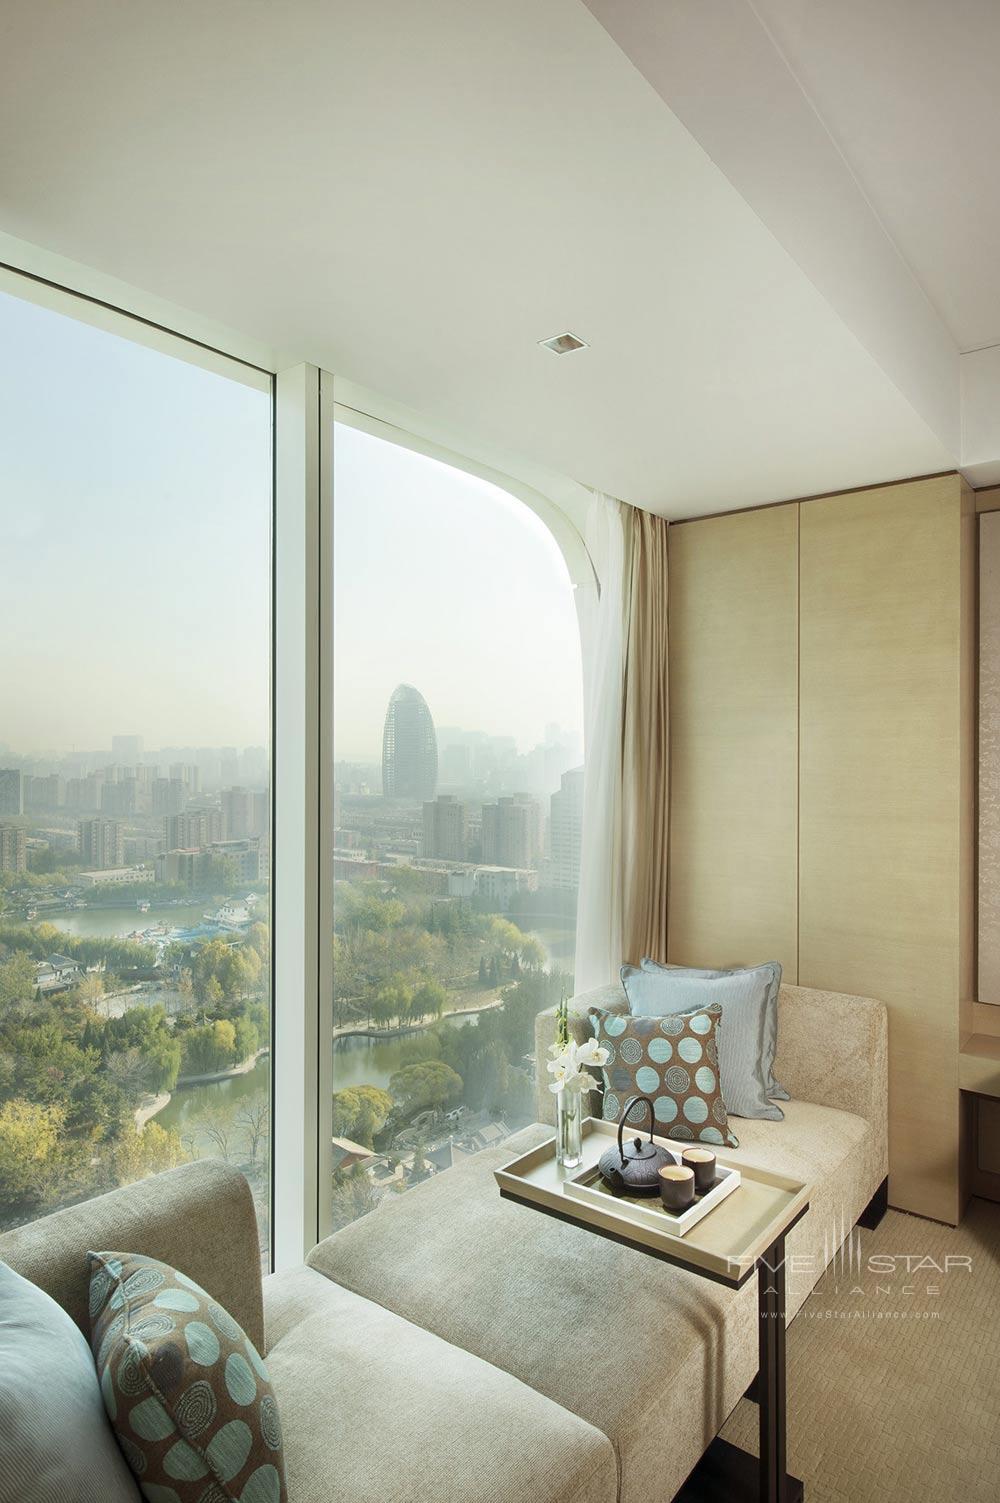 Deluxe room with a lake view at Conrad Beijing, China